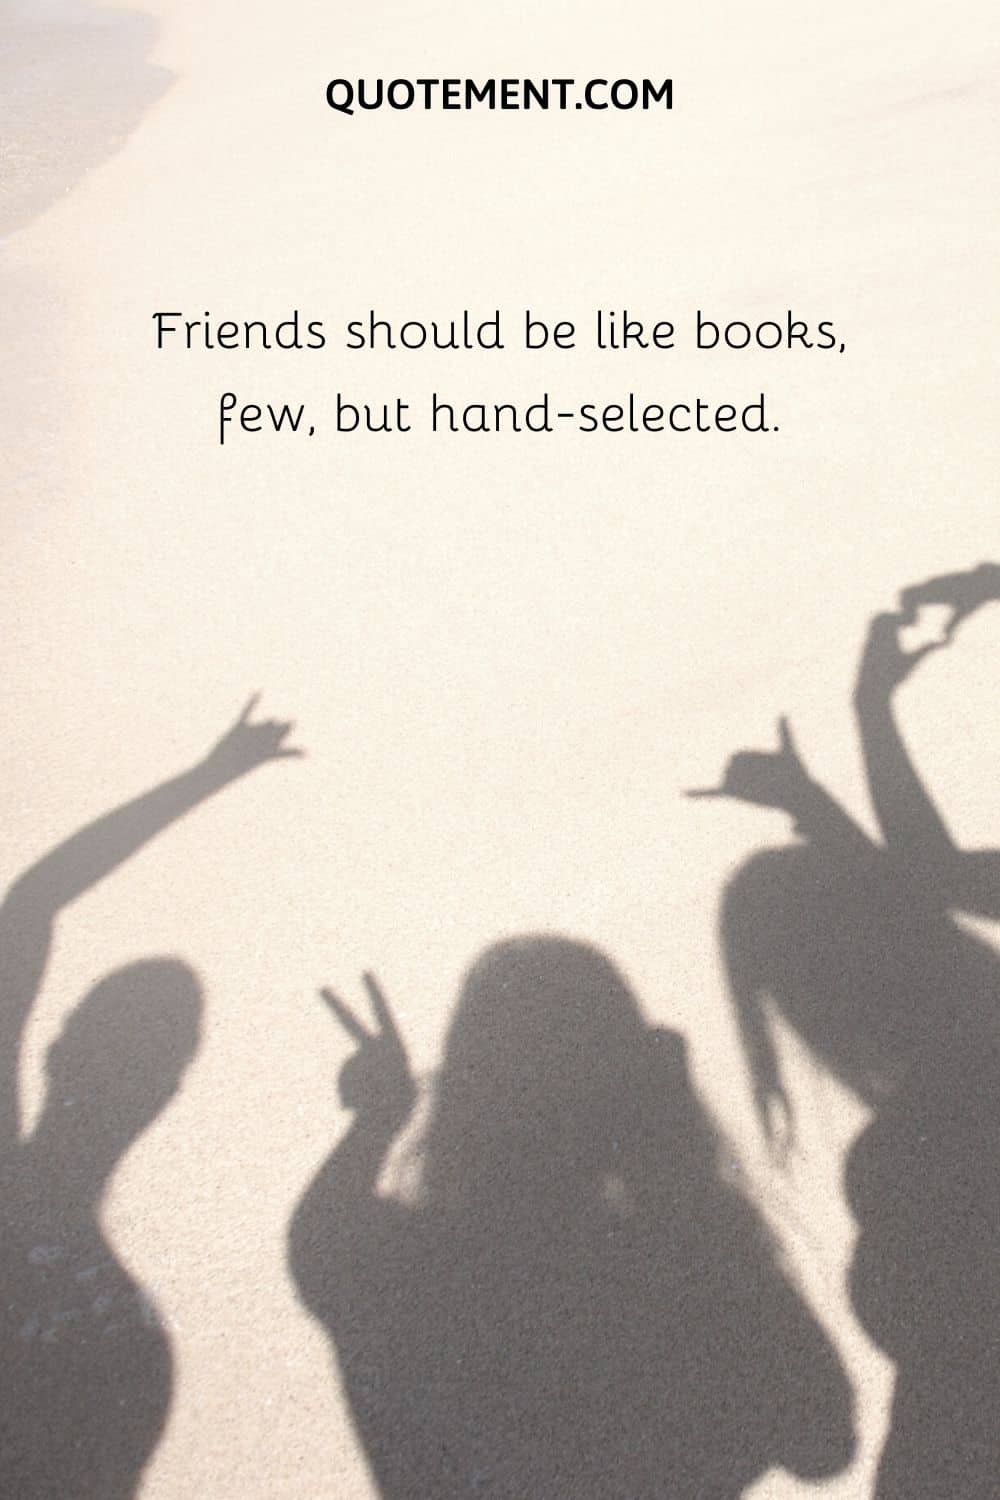 Friends should be like books, few, but hand-selected